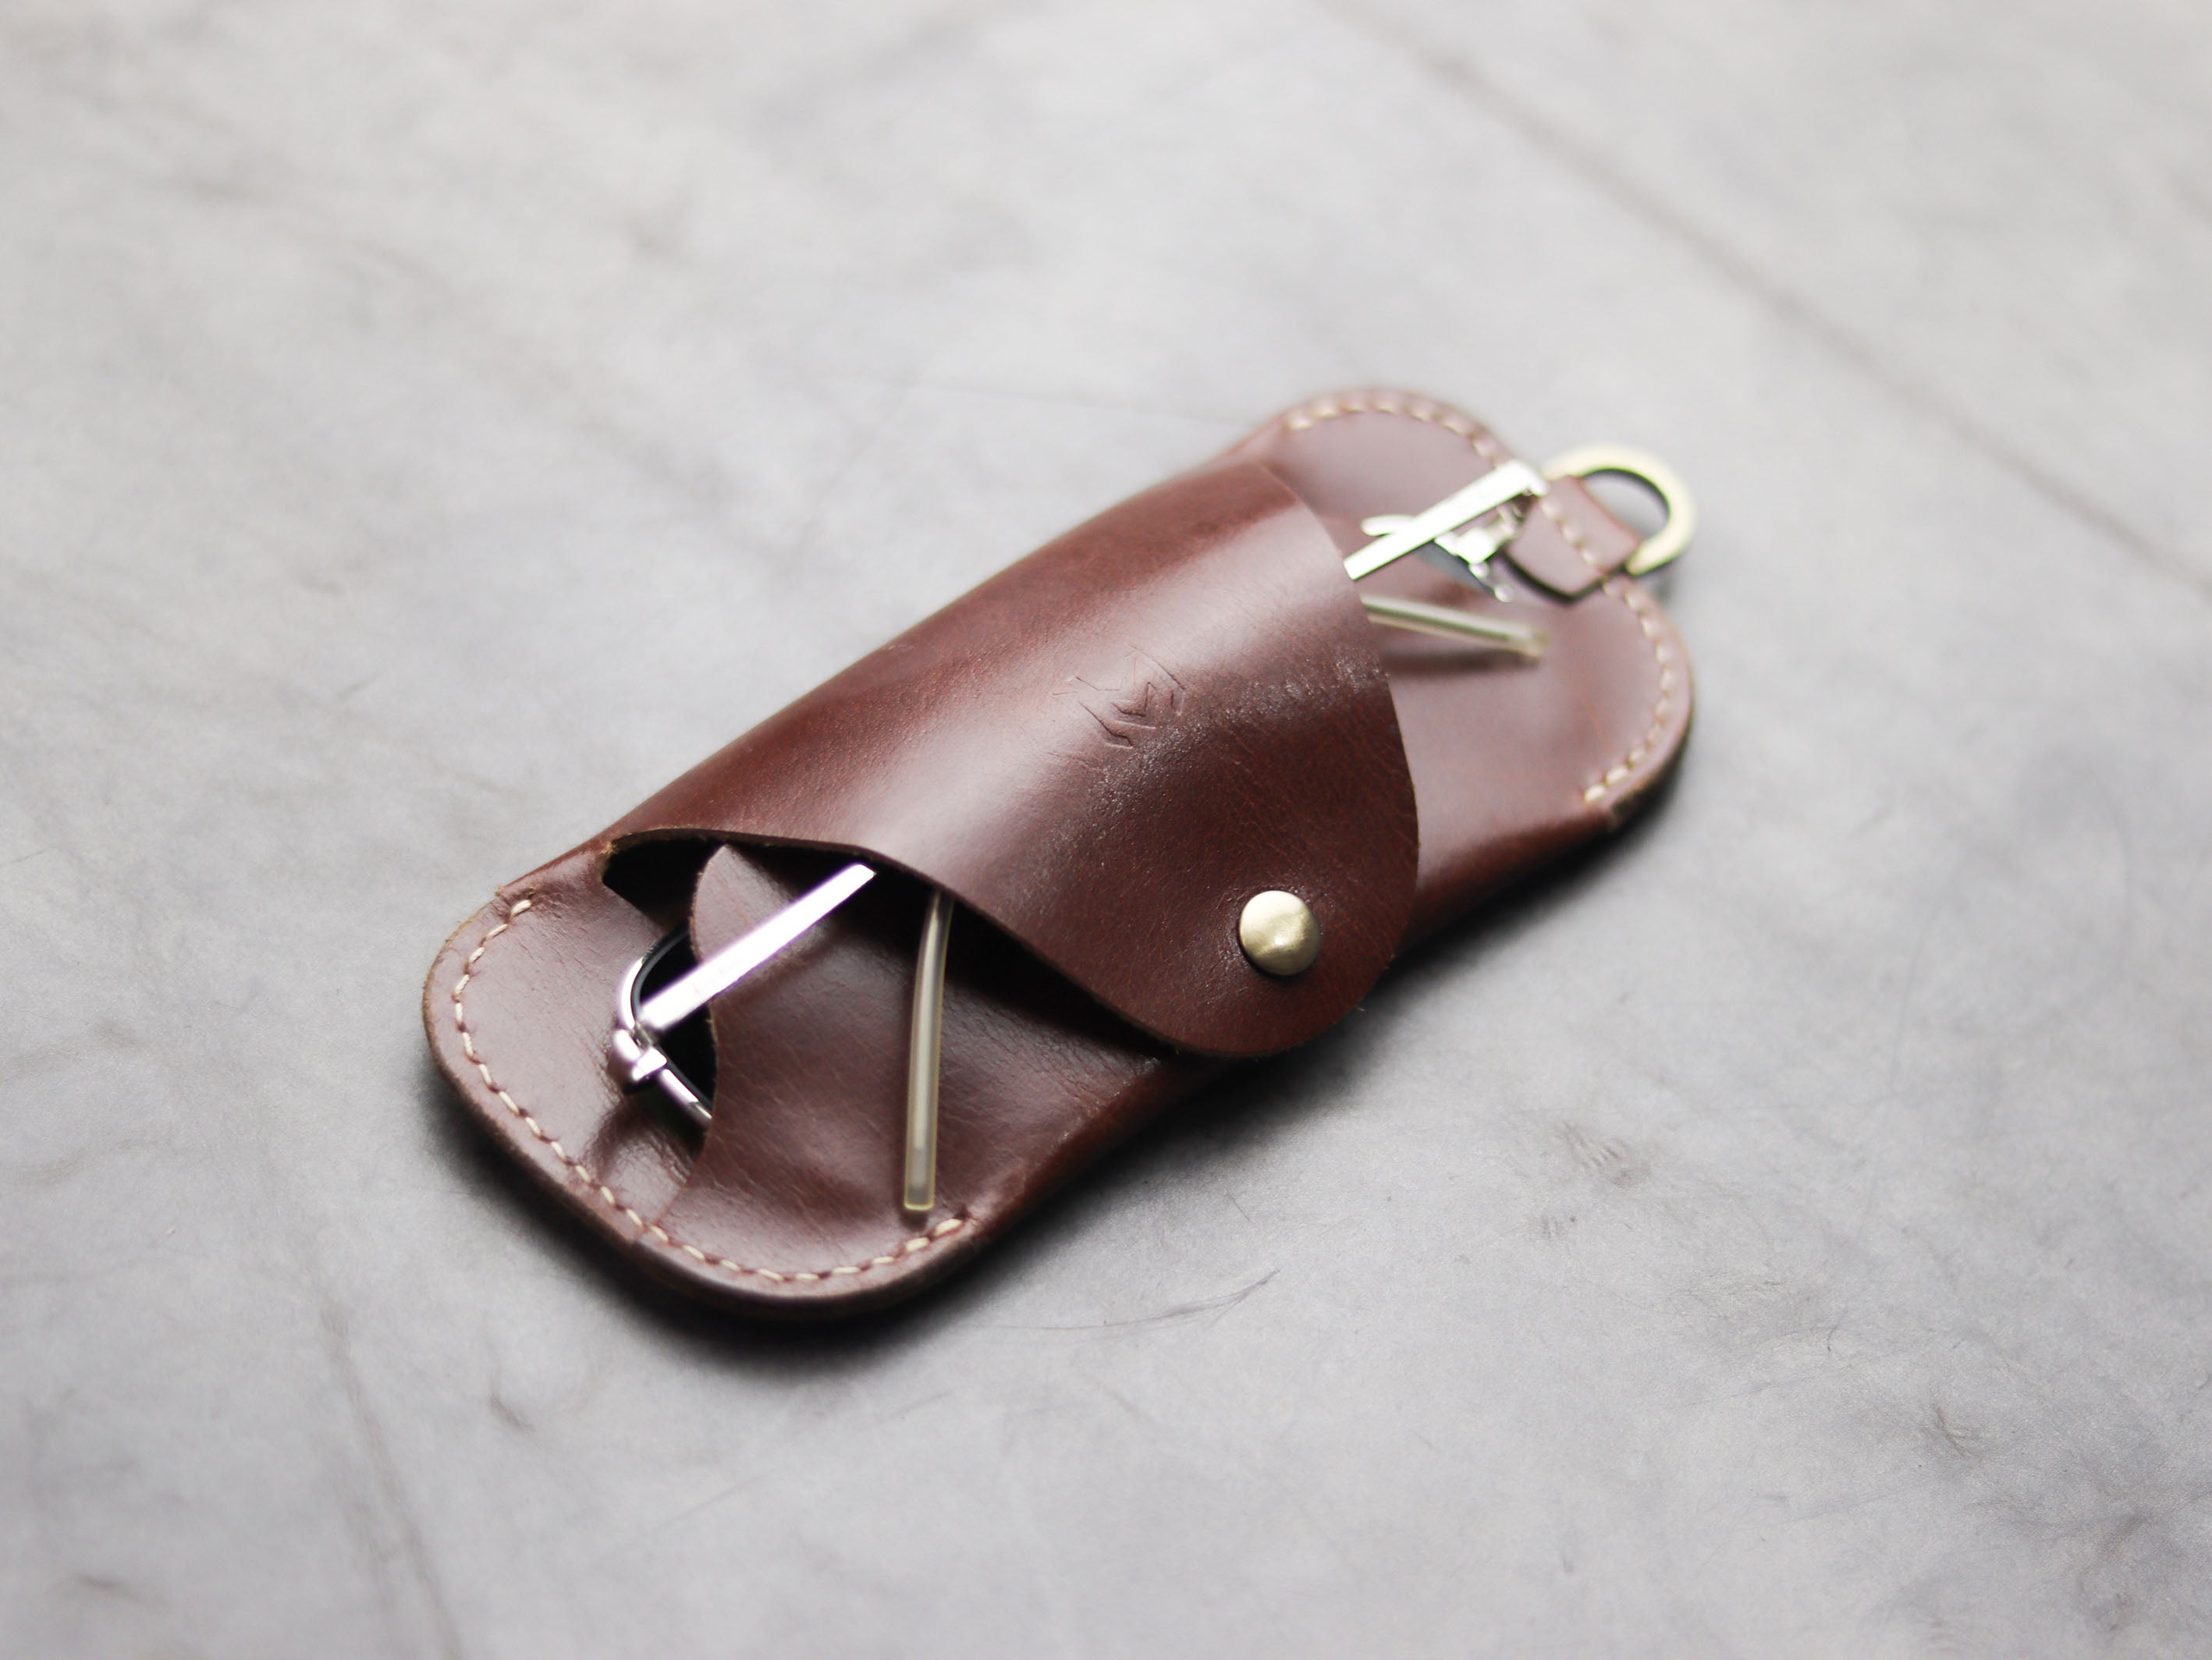 SG-2 SUNGLASSES CASE - WHISKY BROWN LEATHER